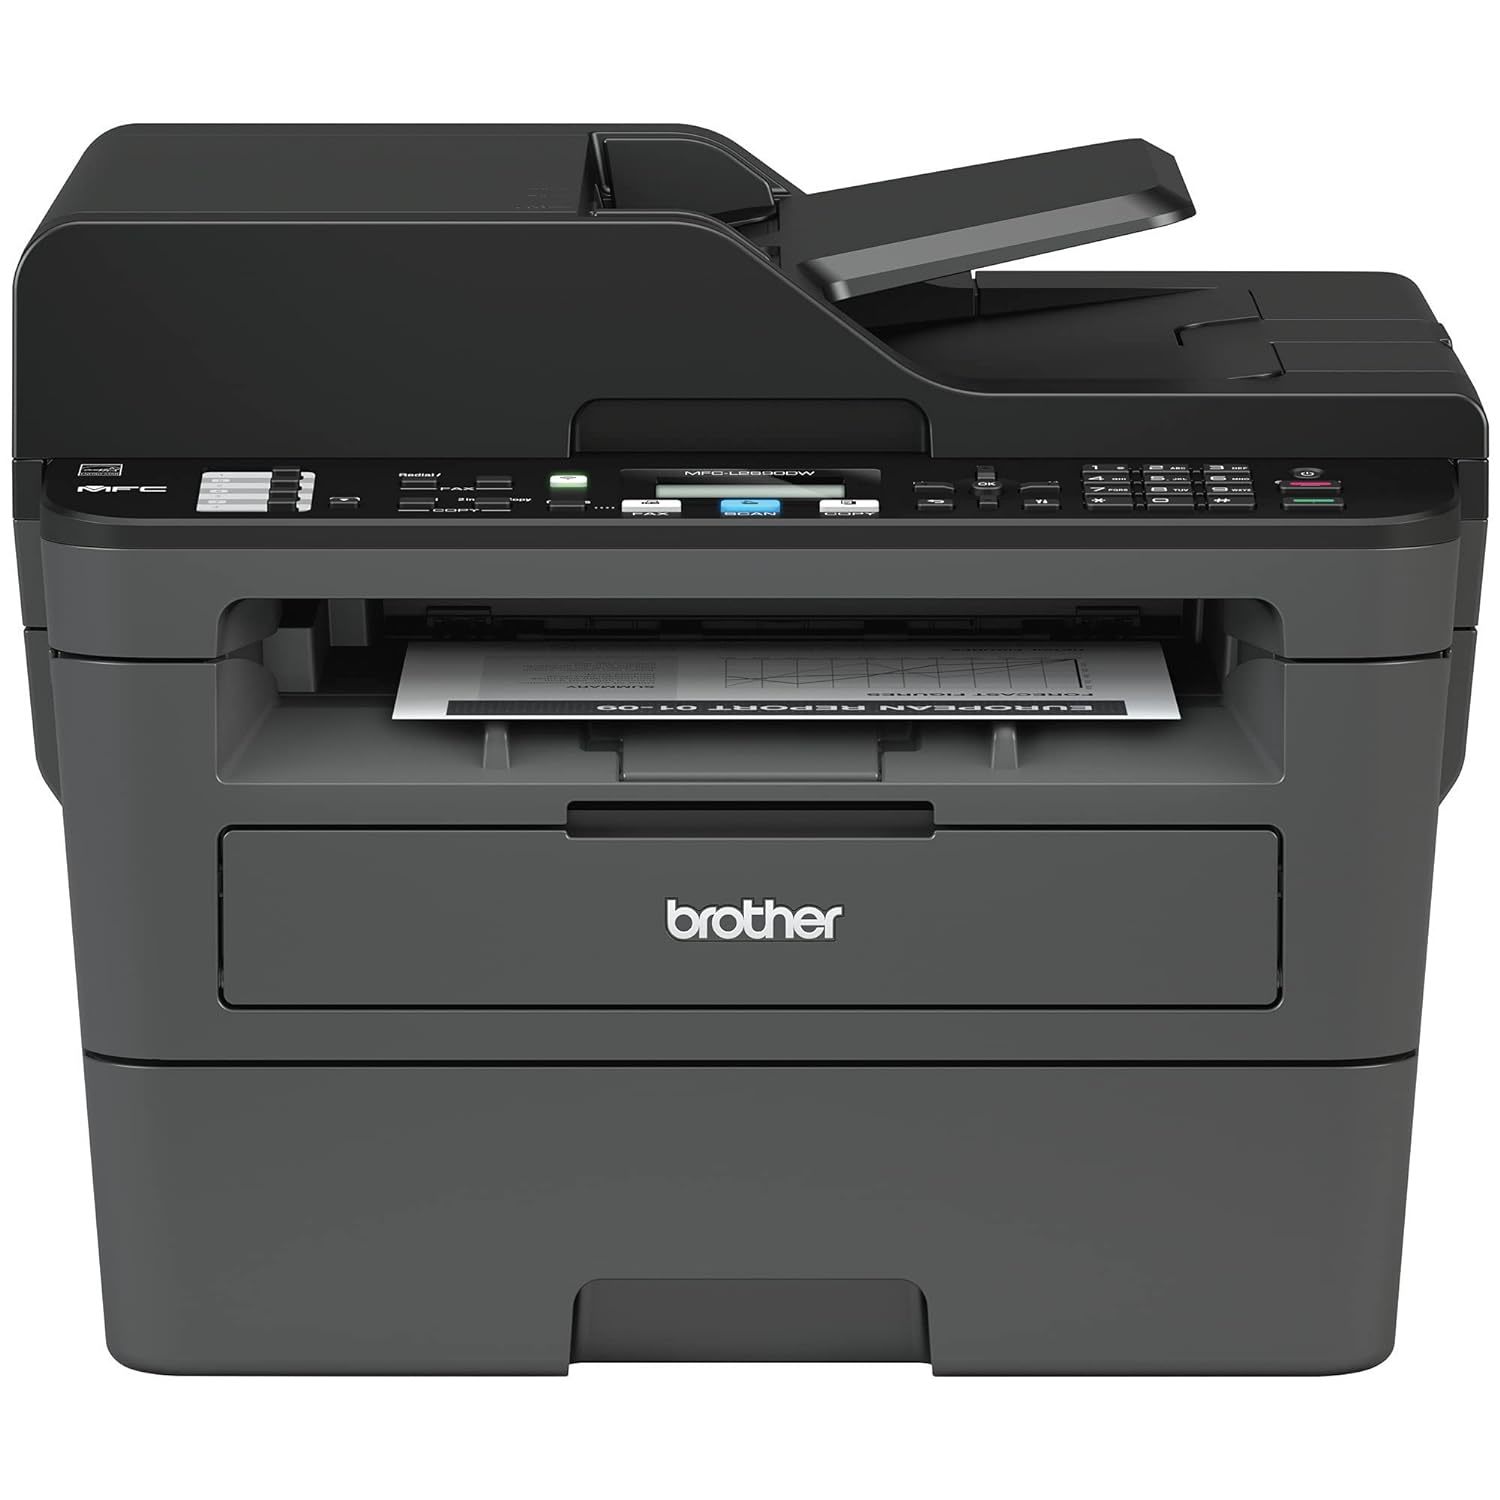 Brother Premium MFC-L2690DW Compact Monochrome All-in-One Laser Printer - $428.99